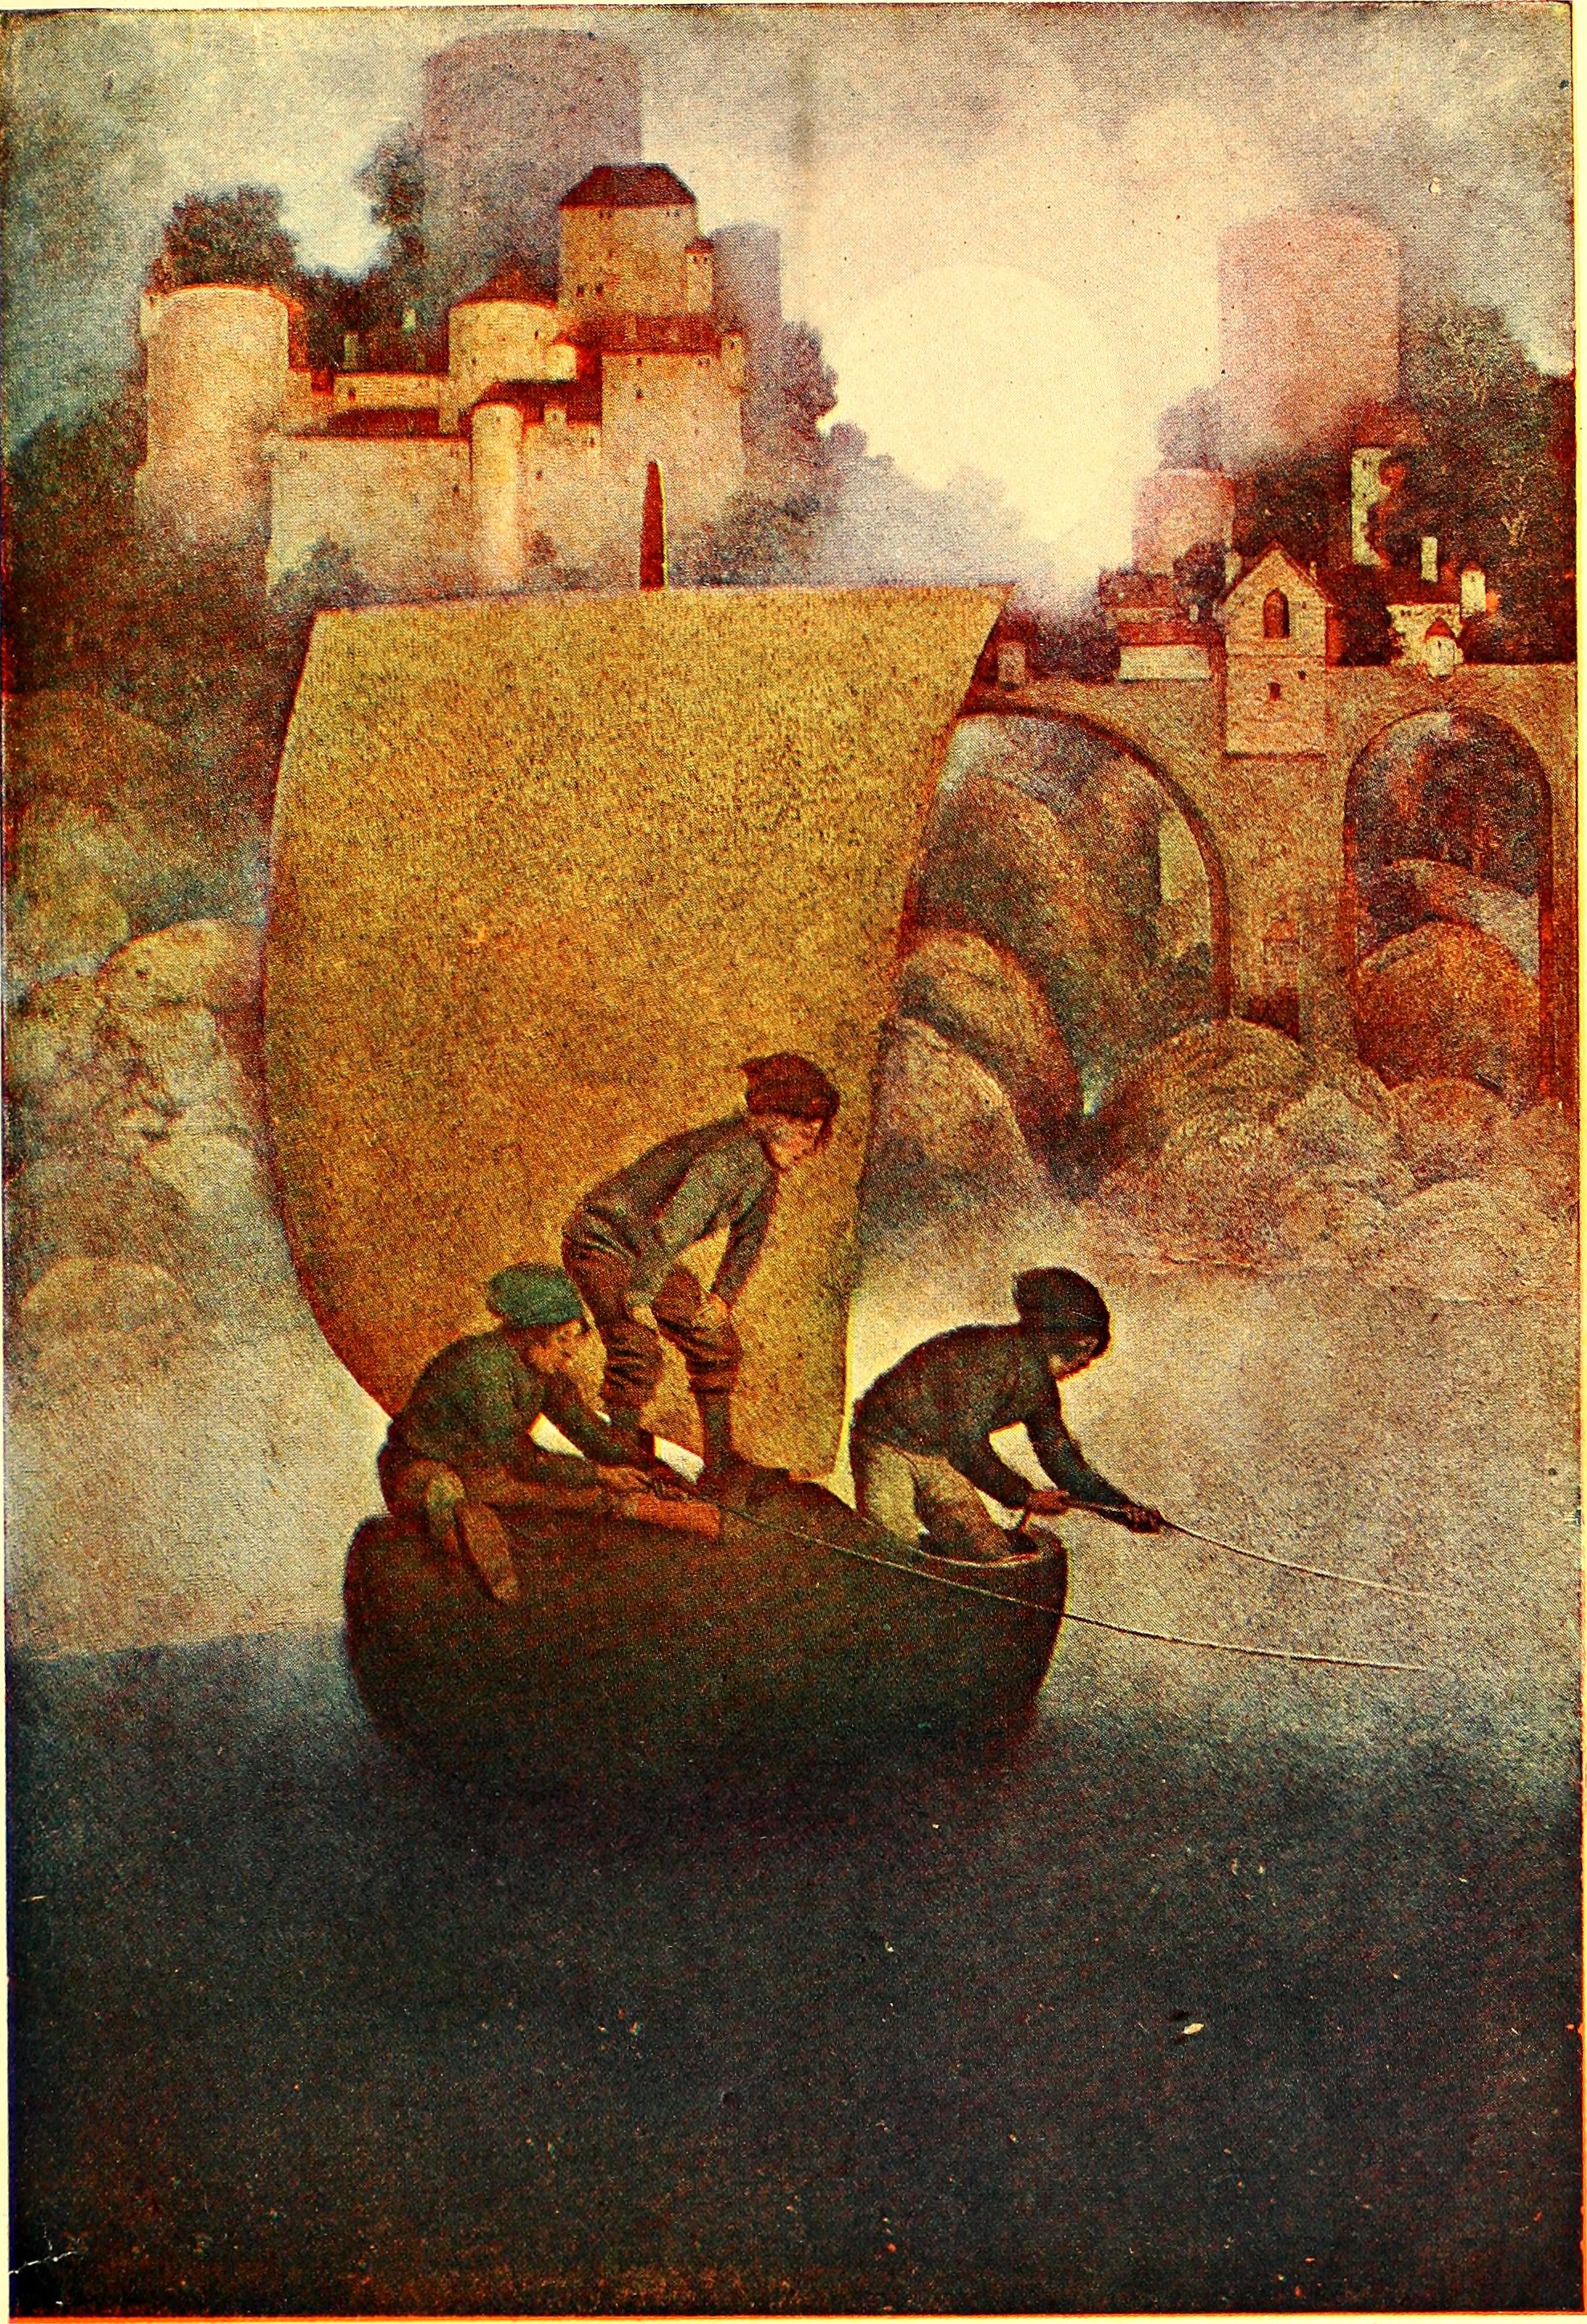 Illustrations from Poems of Childhood (1904) by Eugene Field with illustrations by Maxfield Parrish